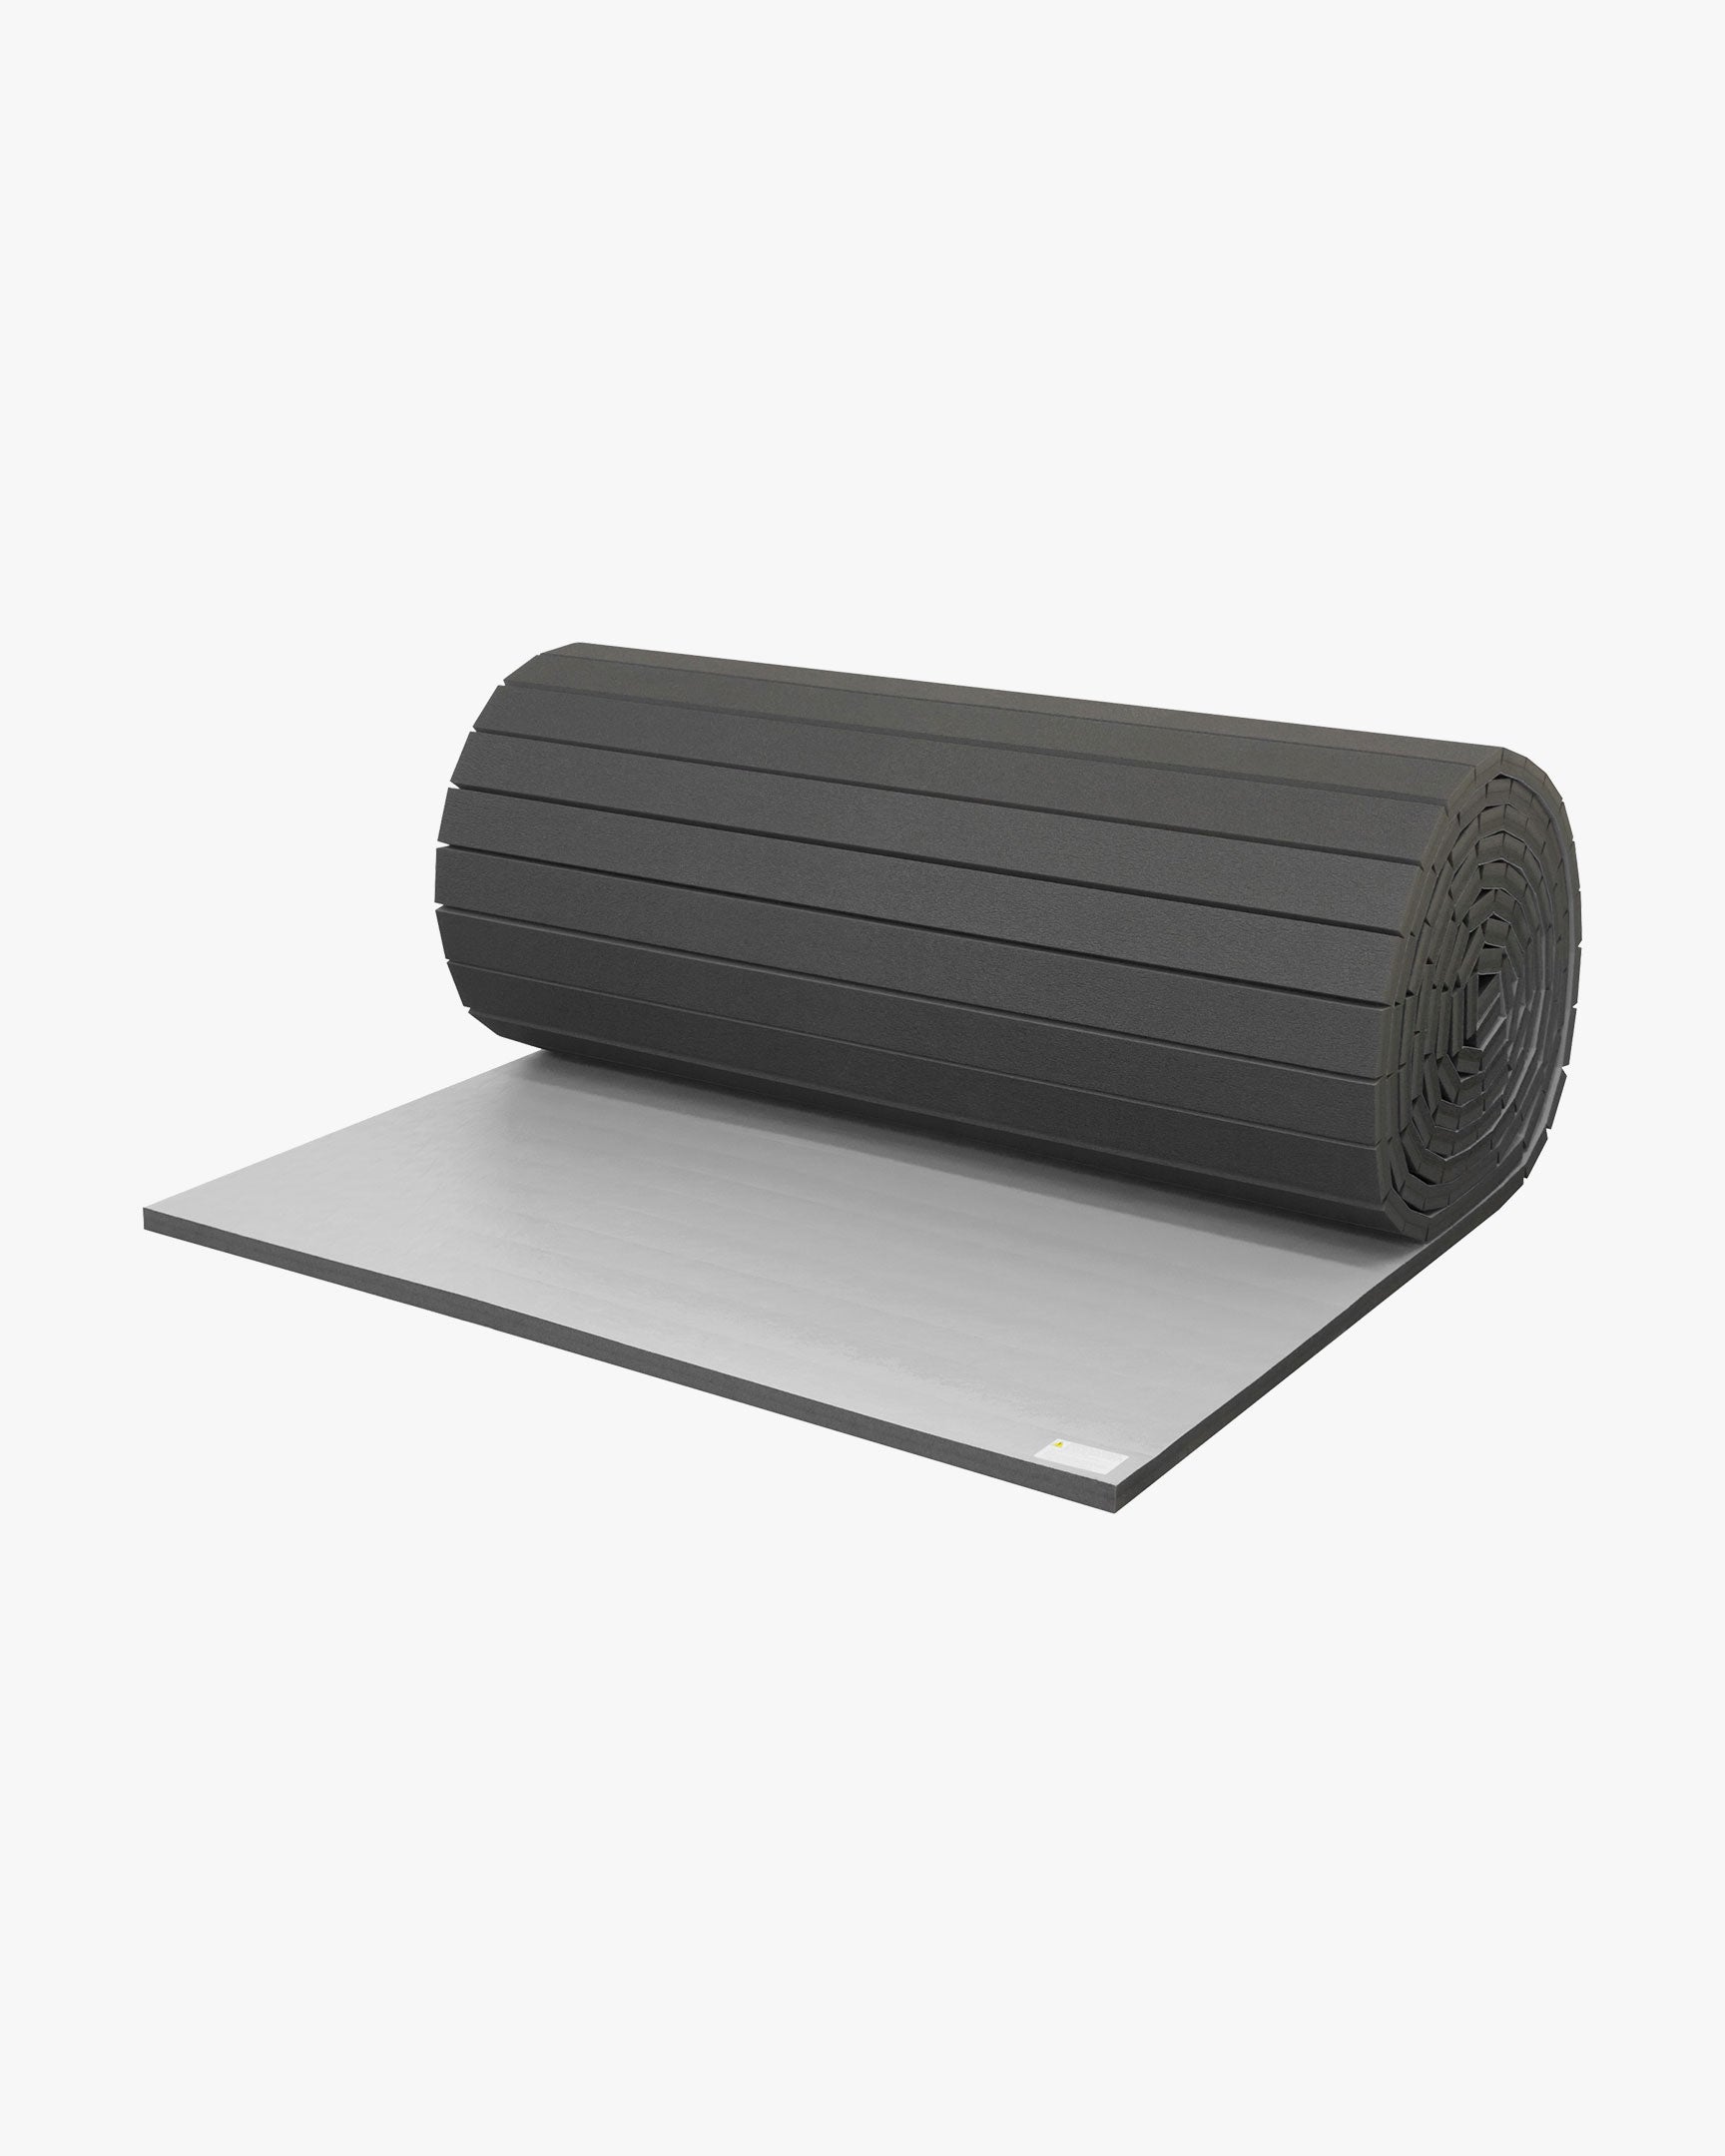 Custom Rollout Mat - 1-5/8 Inches Thick Charcoal Grey